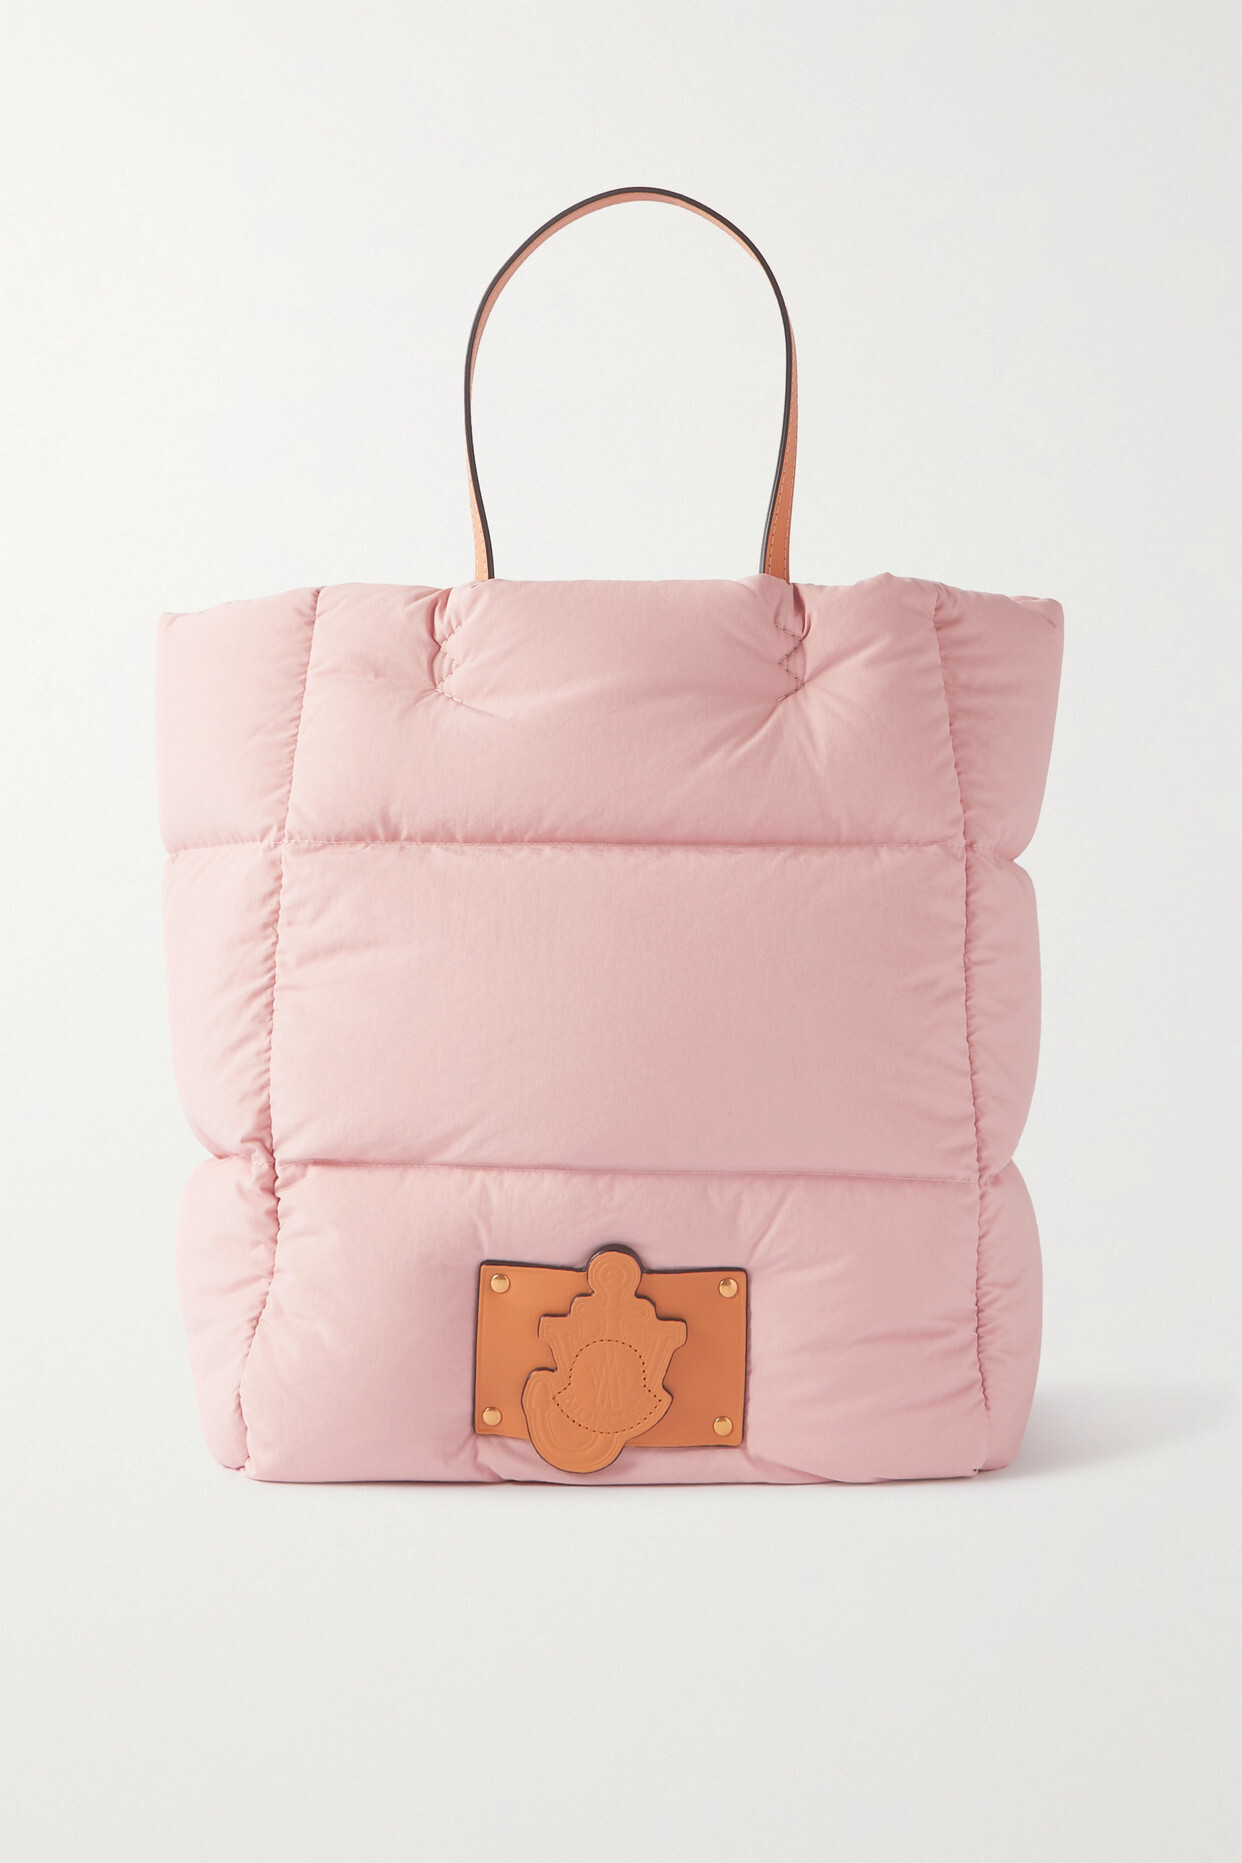 Moncler Genius - + Jw Anderson Leather-trimmed Quilted Nylon Tote - Pink